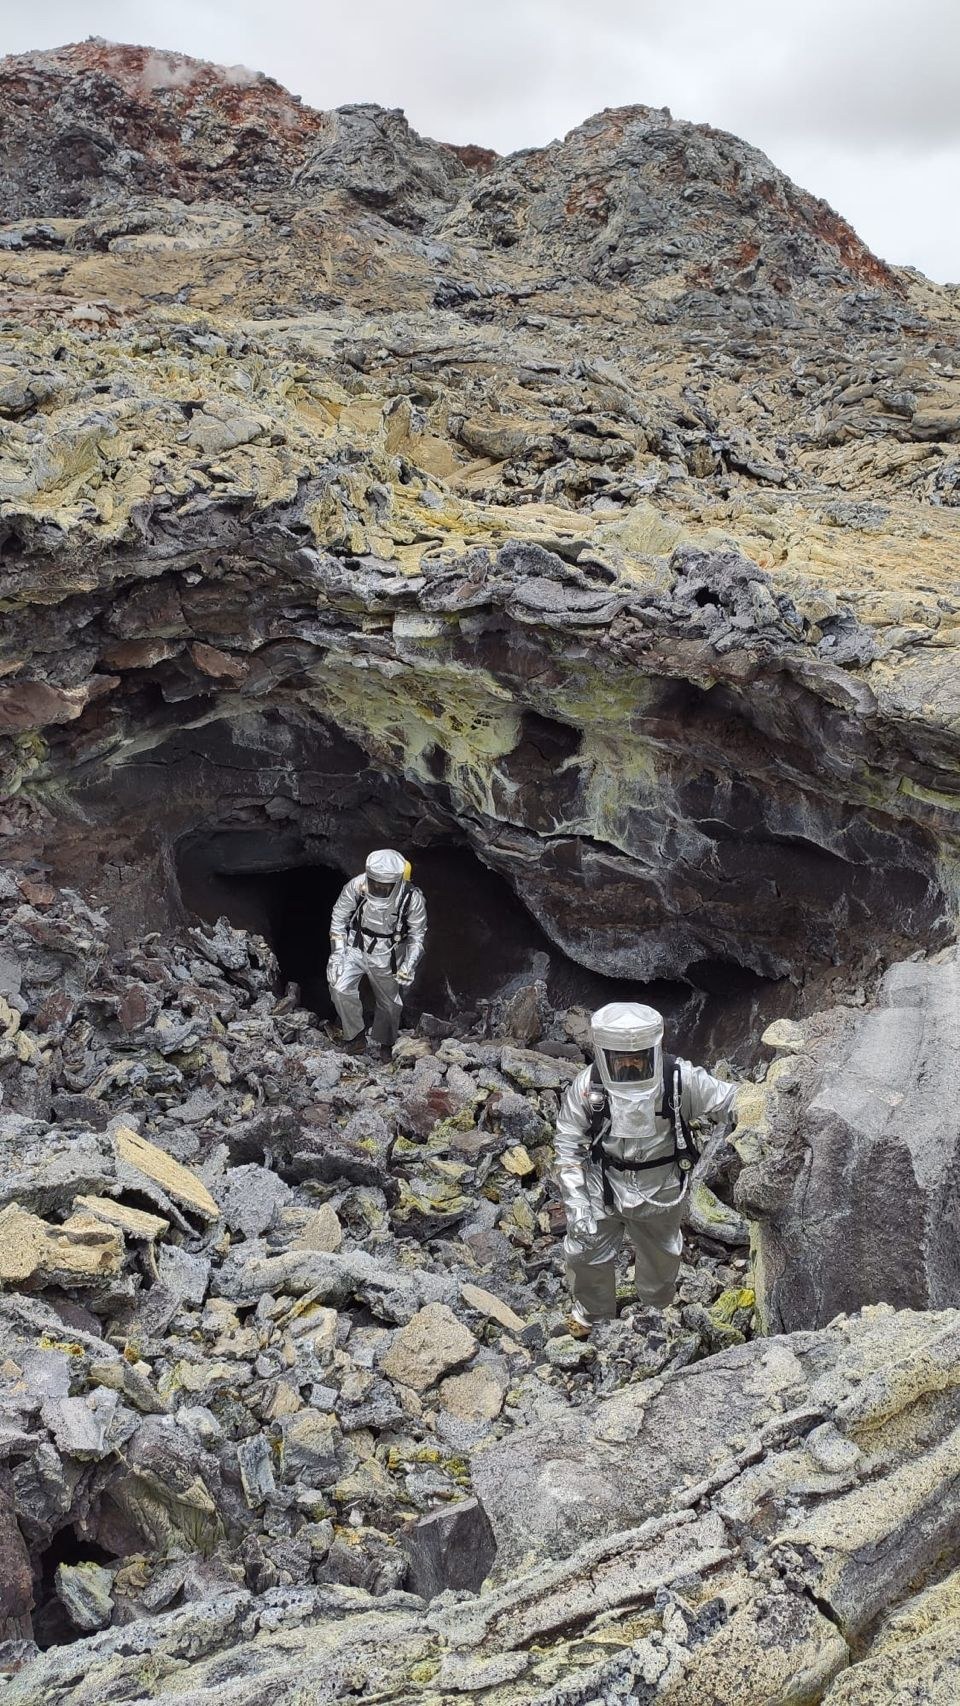 La Venta exploration team is coming out from one of the newly formed lava tube using special equipments for very high temperature environments